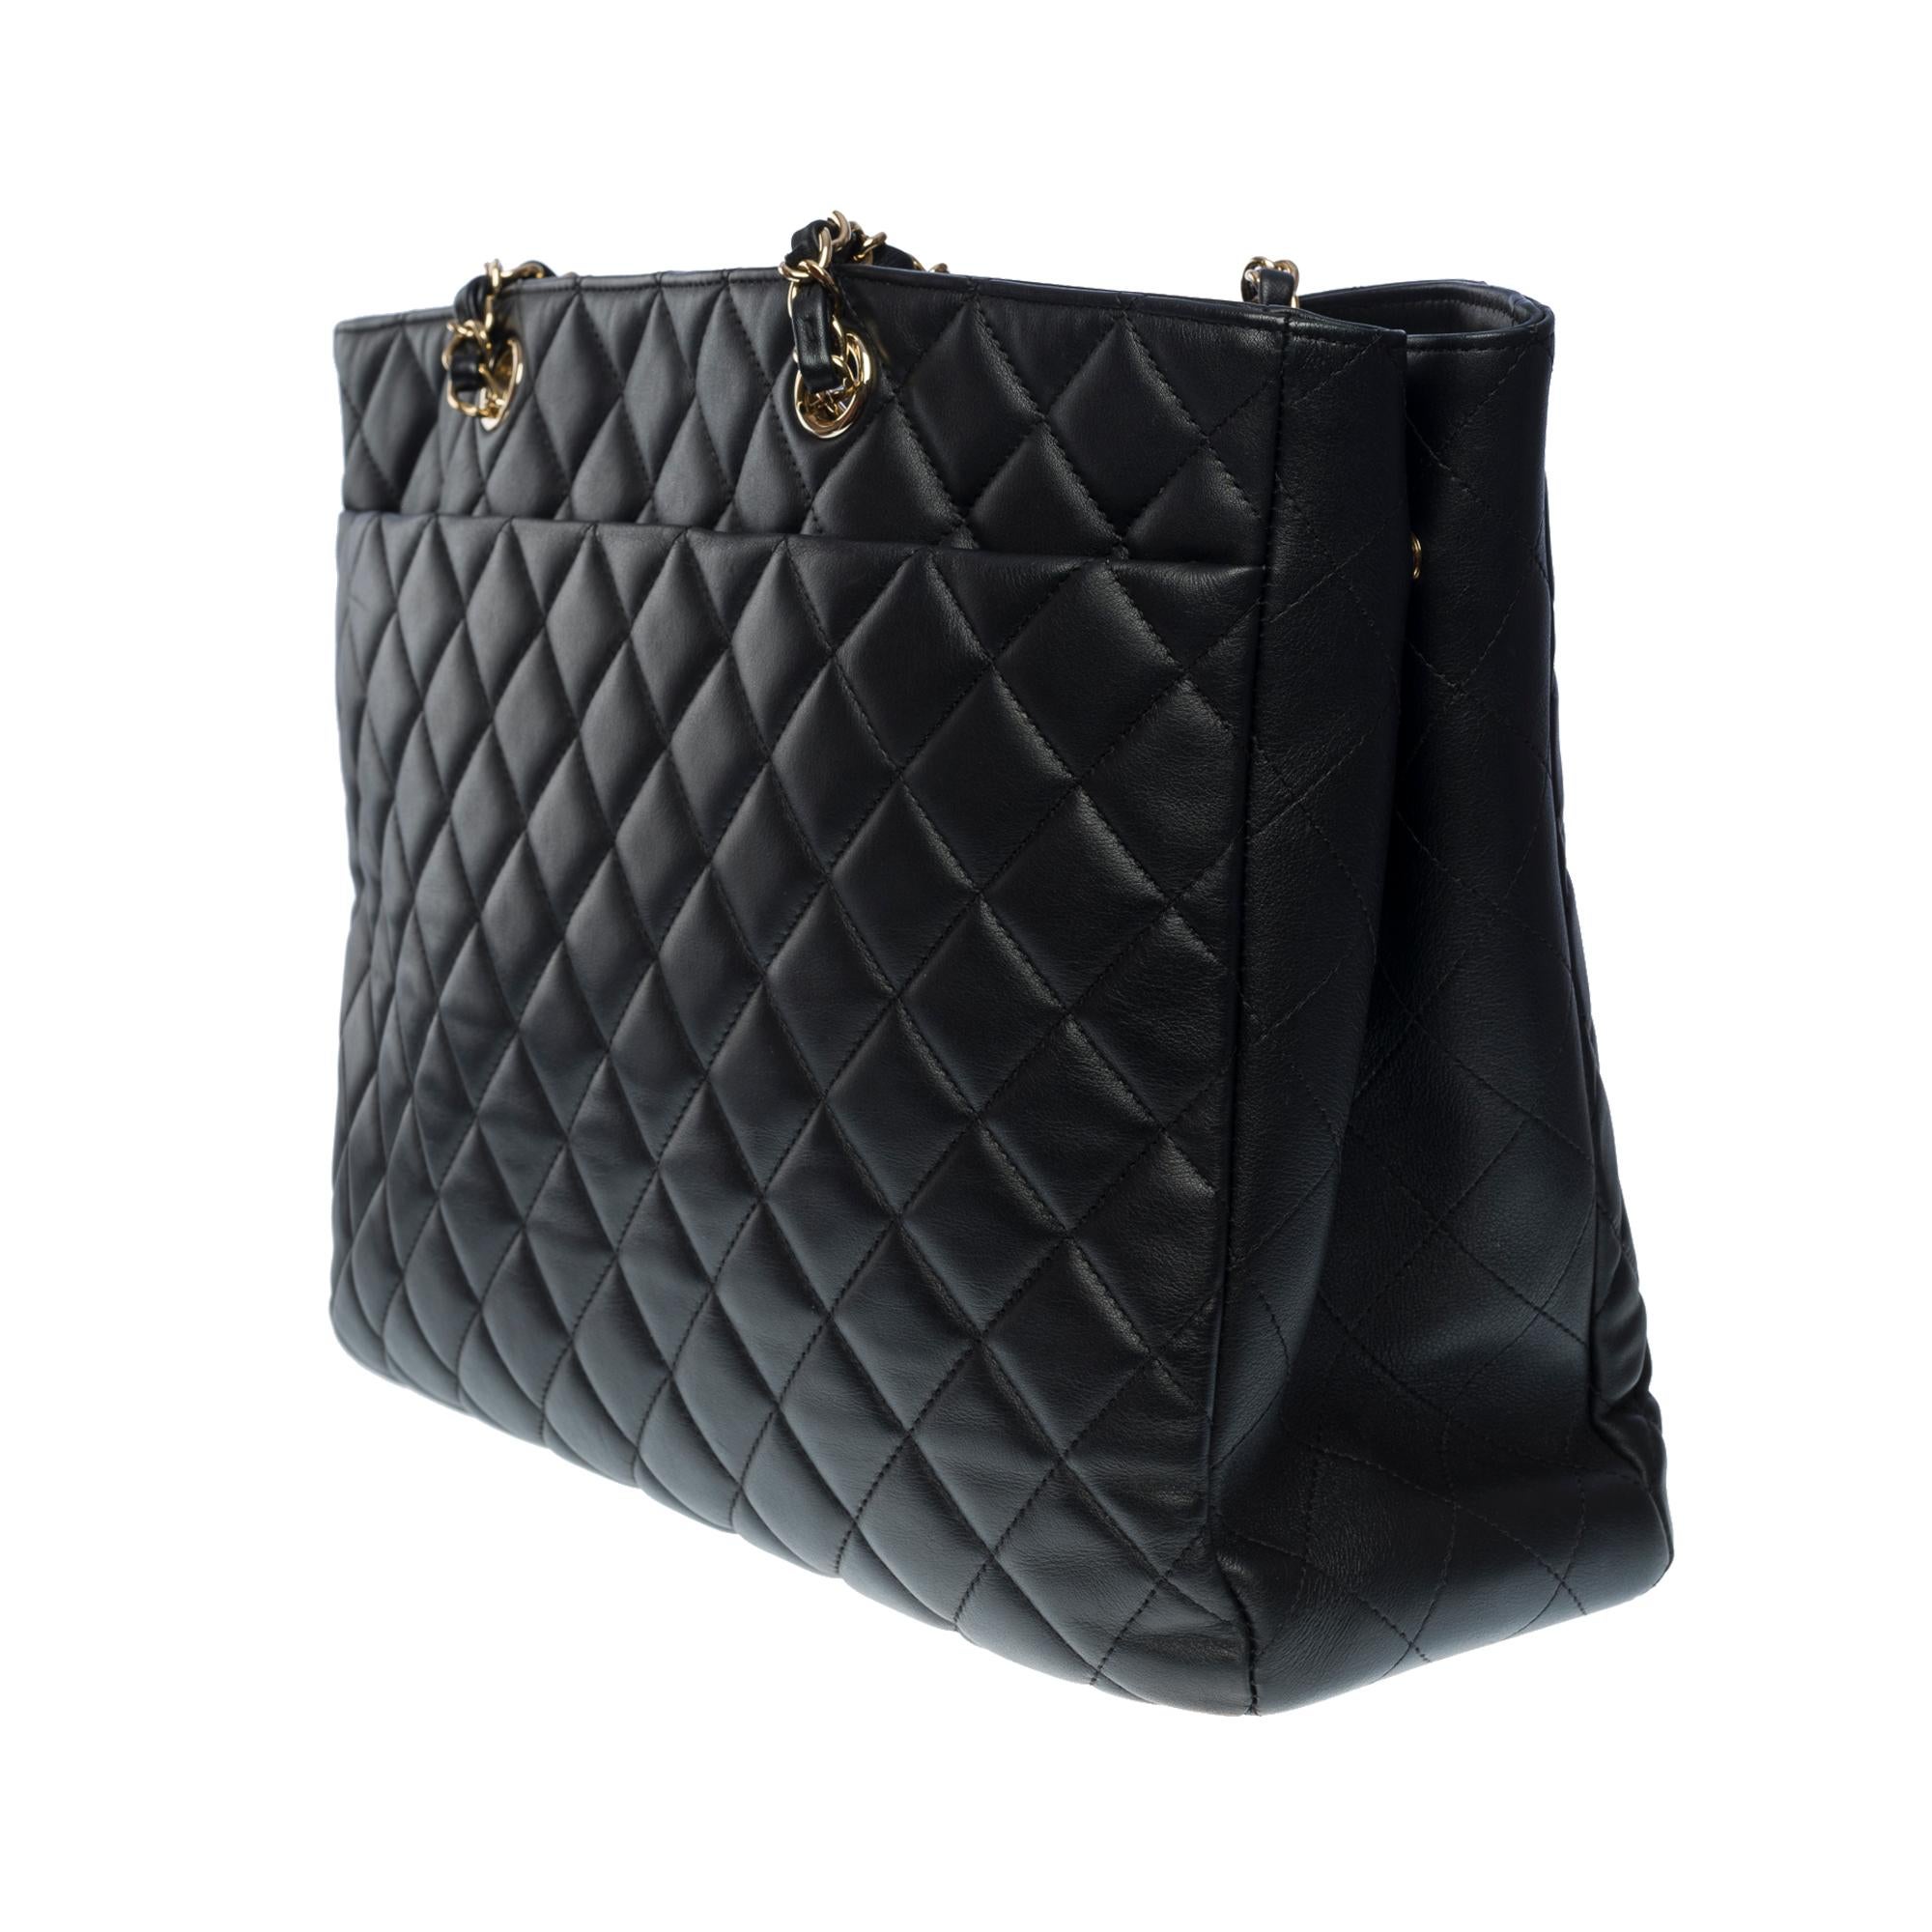 Amazing Chanel Grand Shopping Tote bag in black quilted lambskin leather, SHW 1